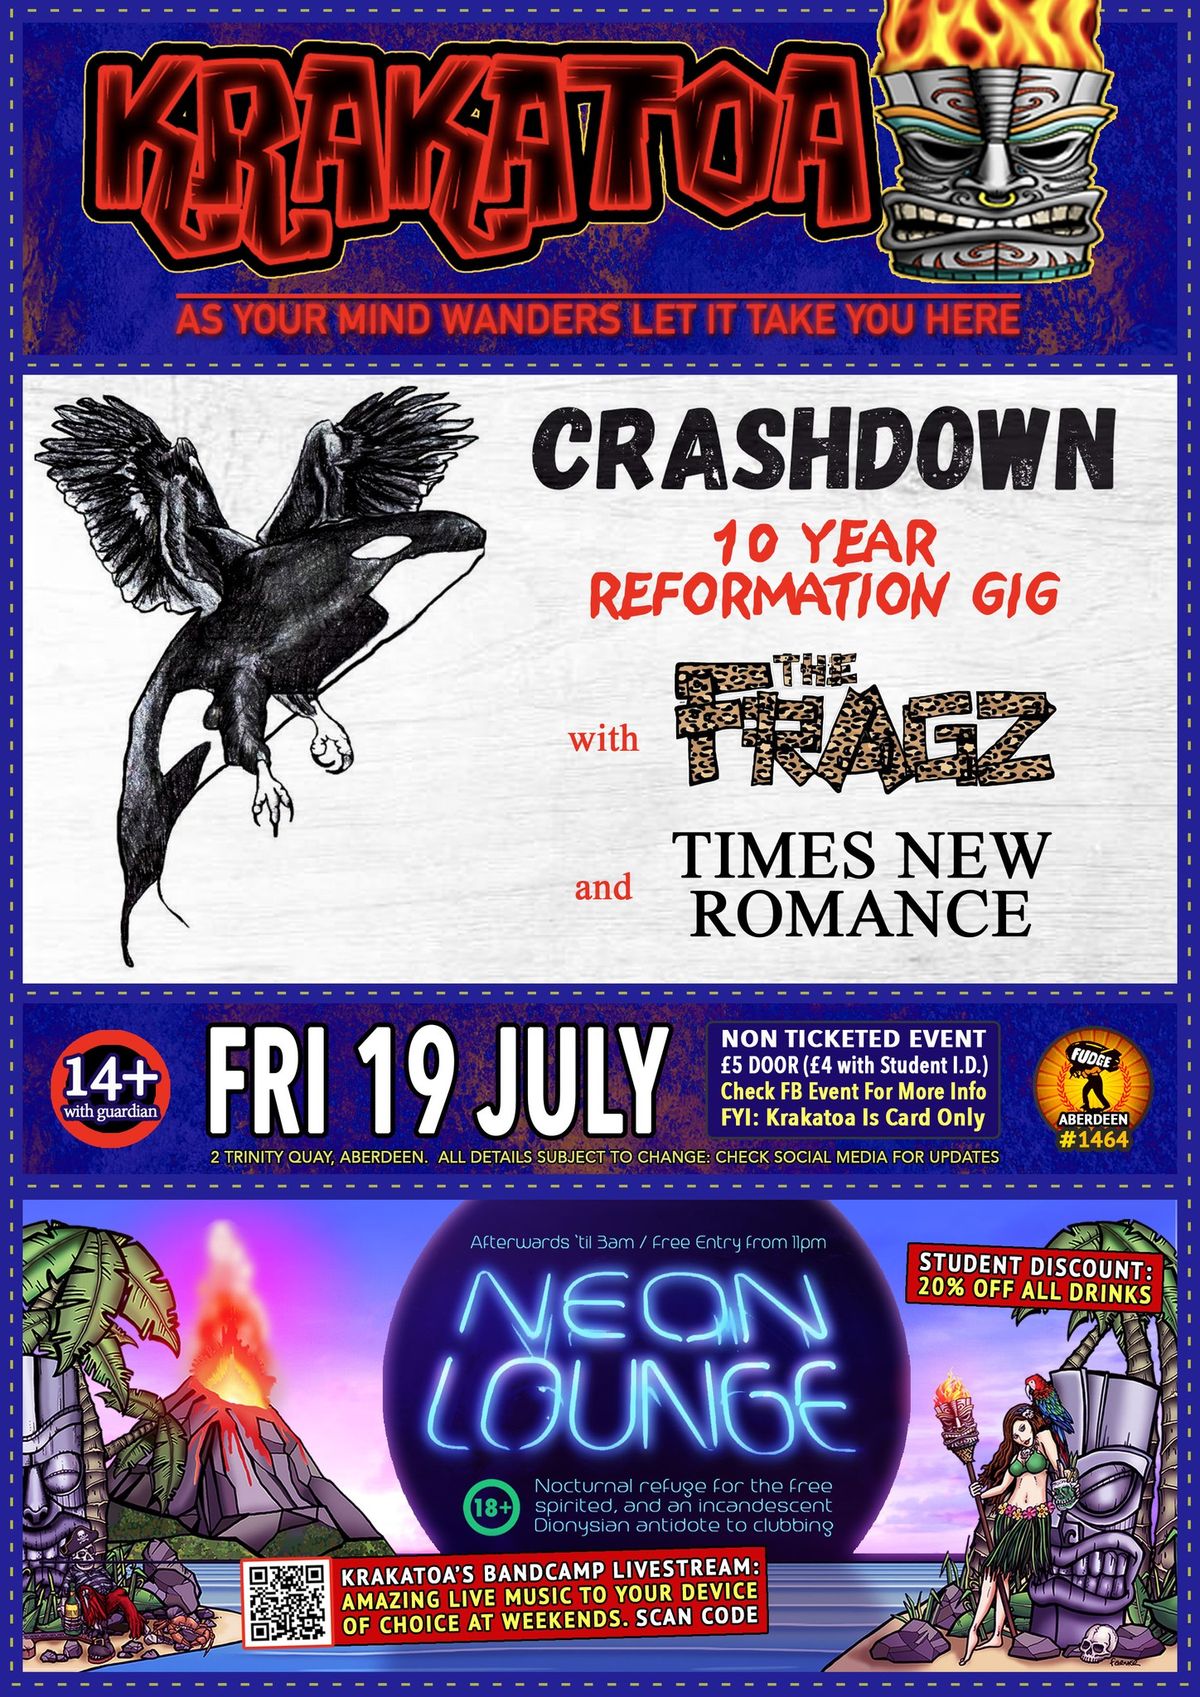 CRASHDOWN [ 10 YEAR REFORMATION GIG ] plus THE FRAGZ and  TIMES NEW ROMANCE